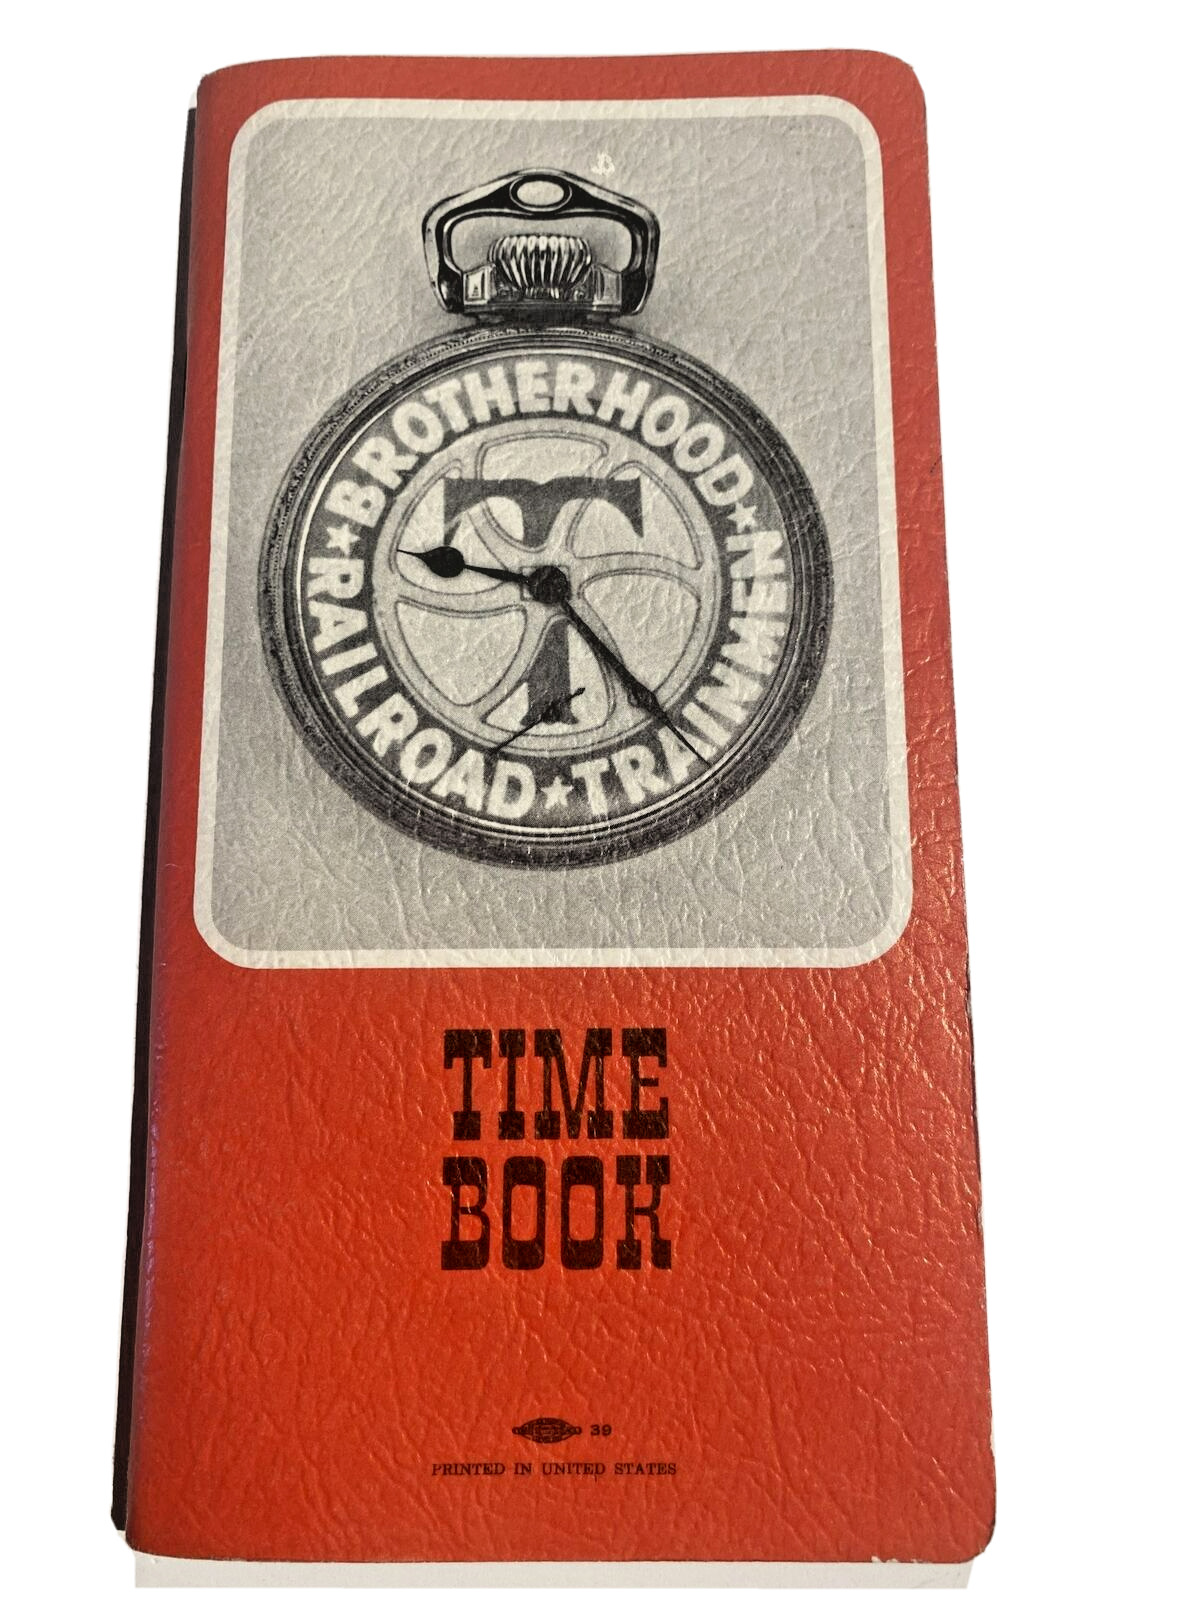 1966 Brotherhood Railroad Trainmen Union Time Book Softcover Pocket Booklet  EX